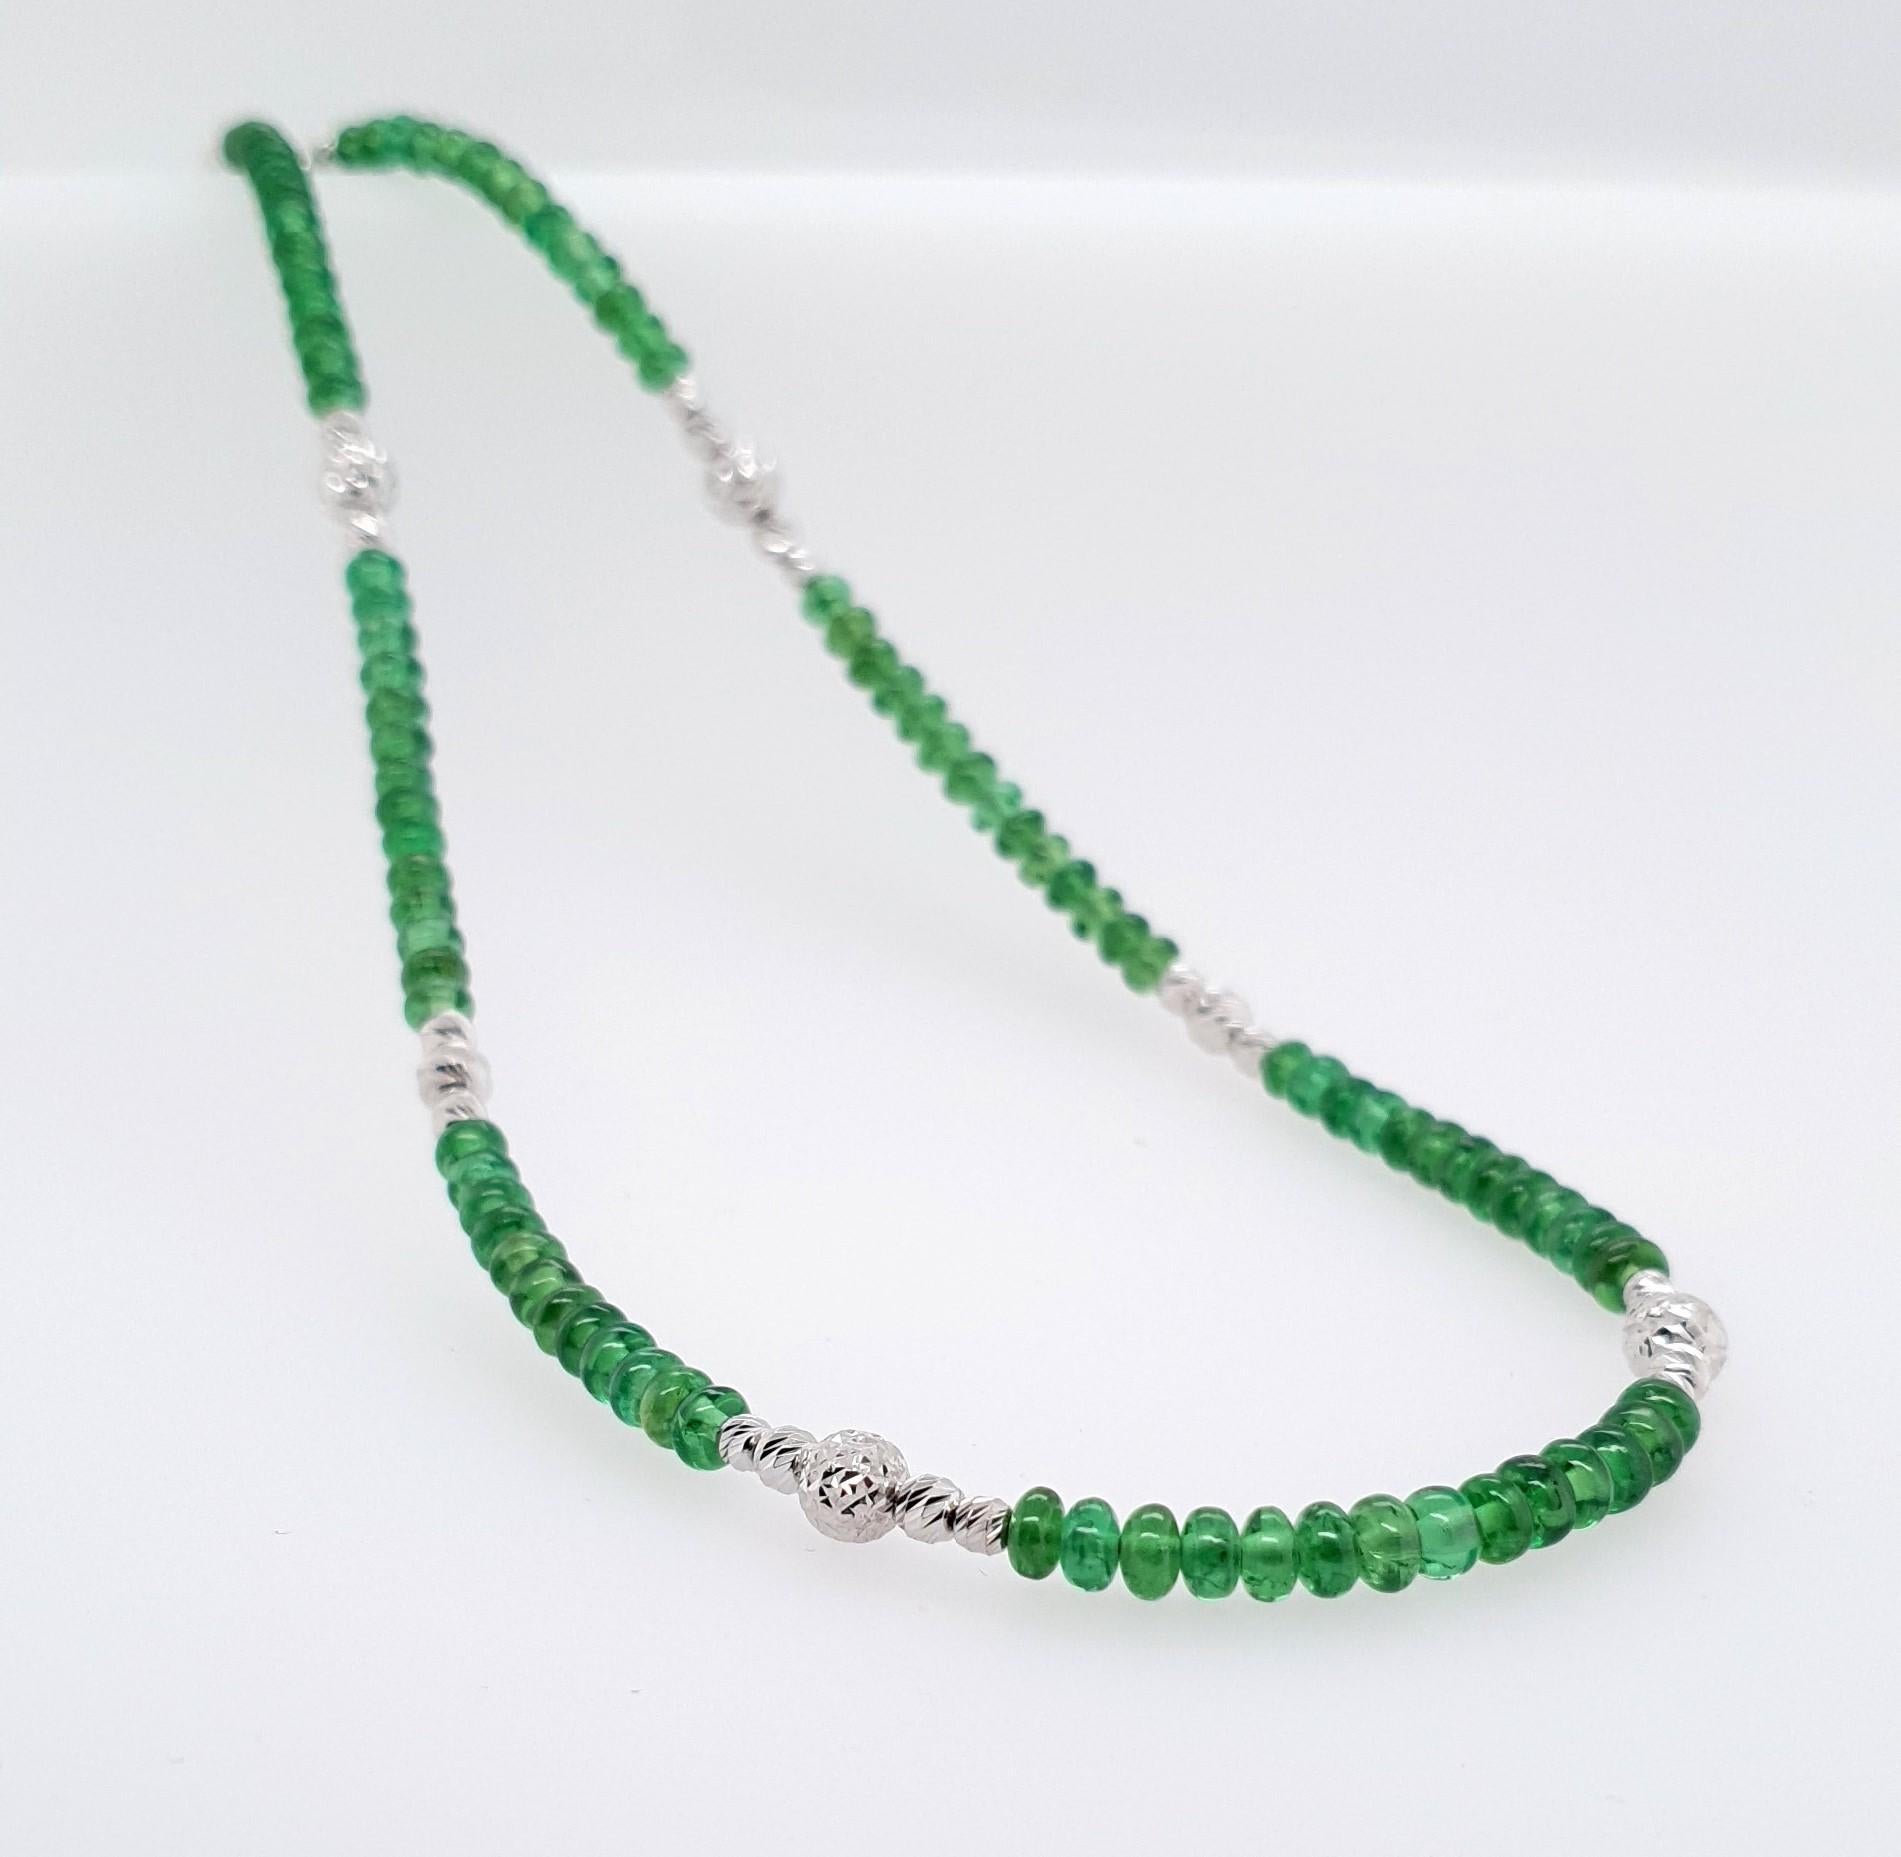 Arts and Crafts Bright Green Tsavorite Rondel Beaded Necklace with 18 Carat White Gold